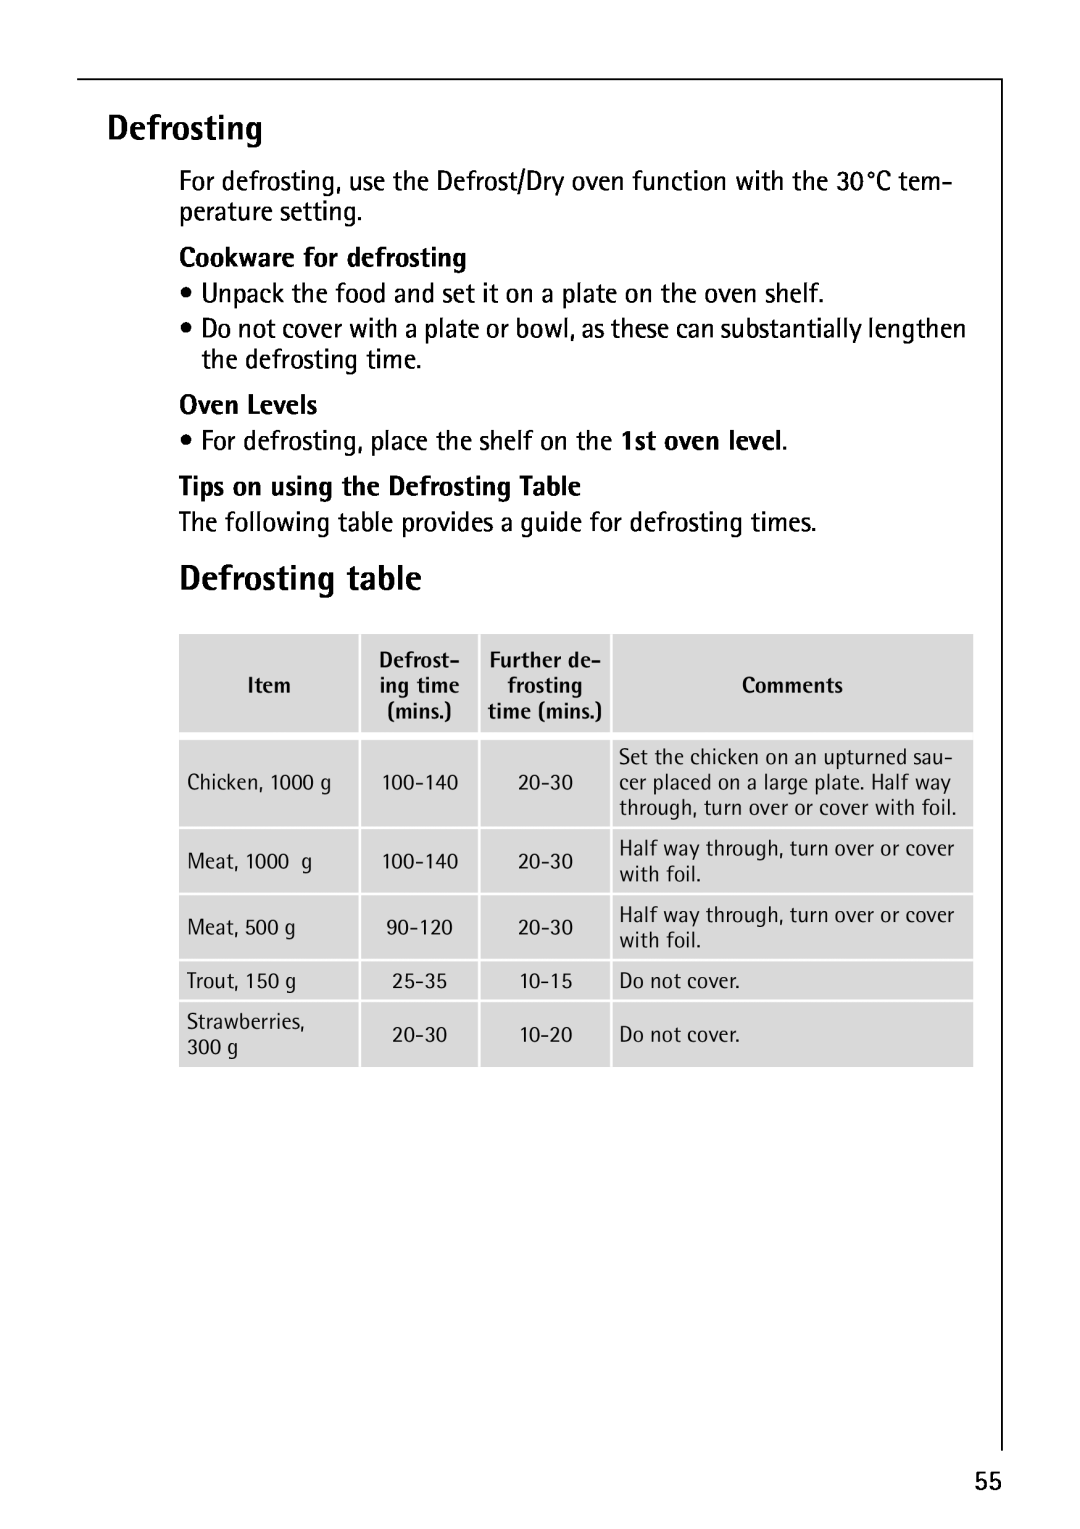 AEG B8920-1 manual Defrosting table, Cookware for defrosting, Tips on using the Defrosting Table, Oven Levels 